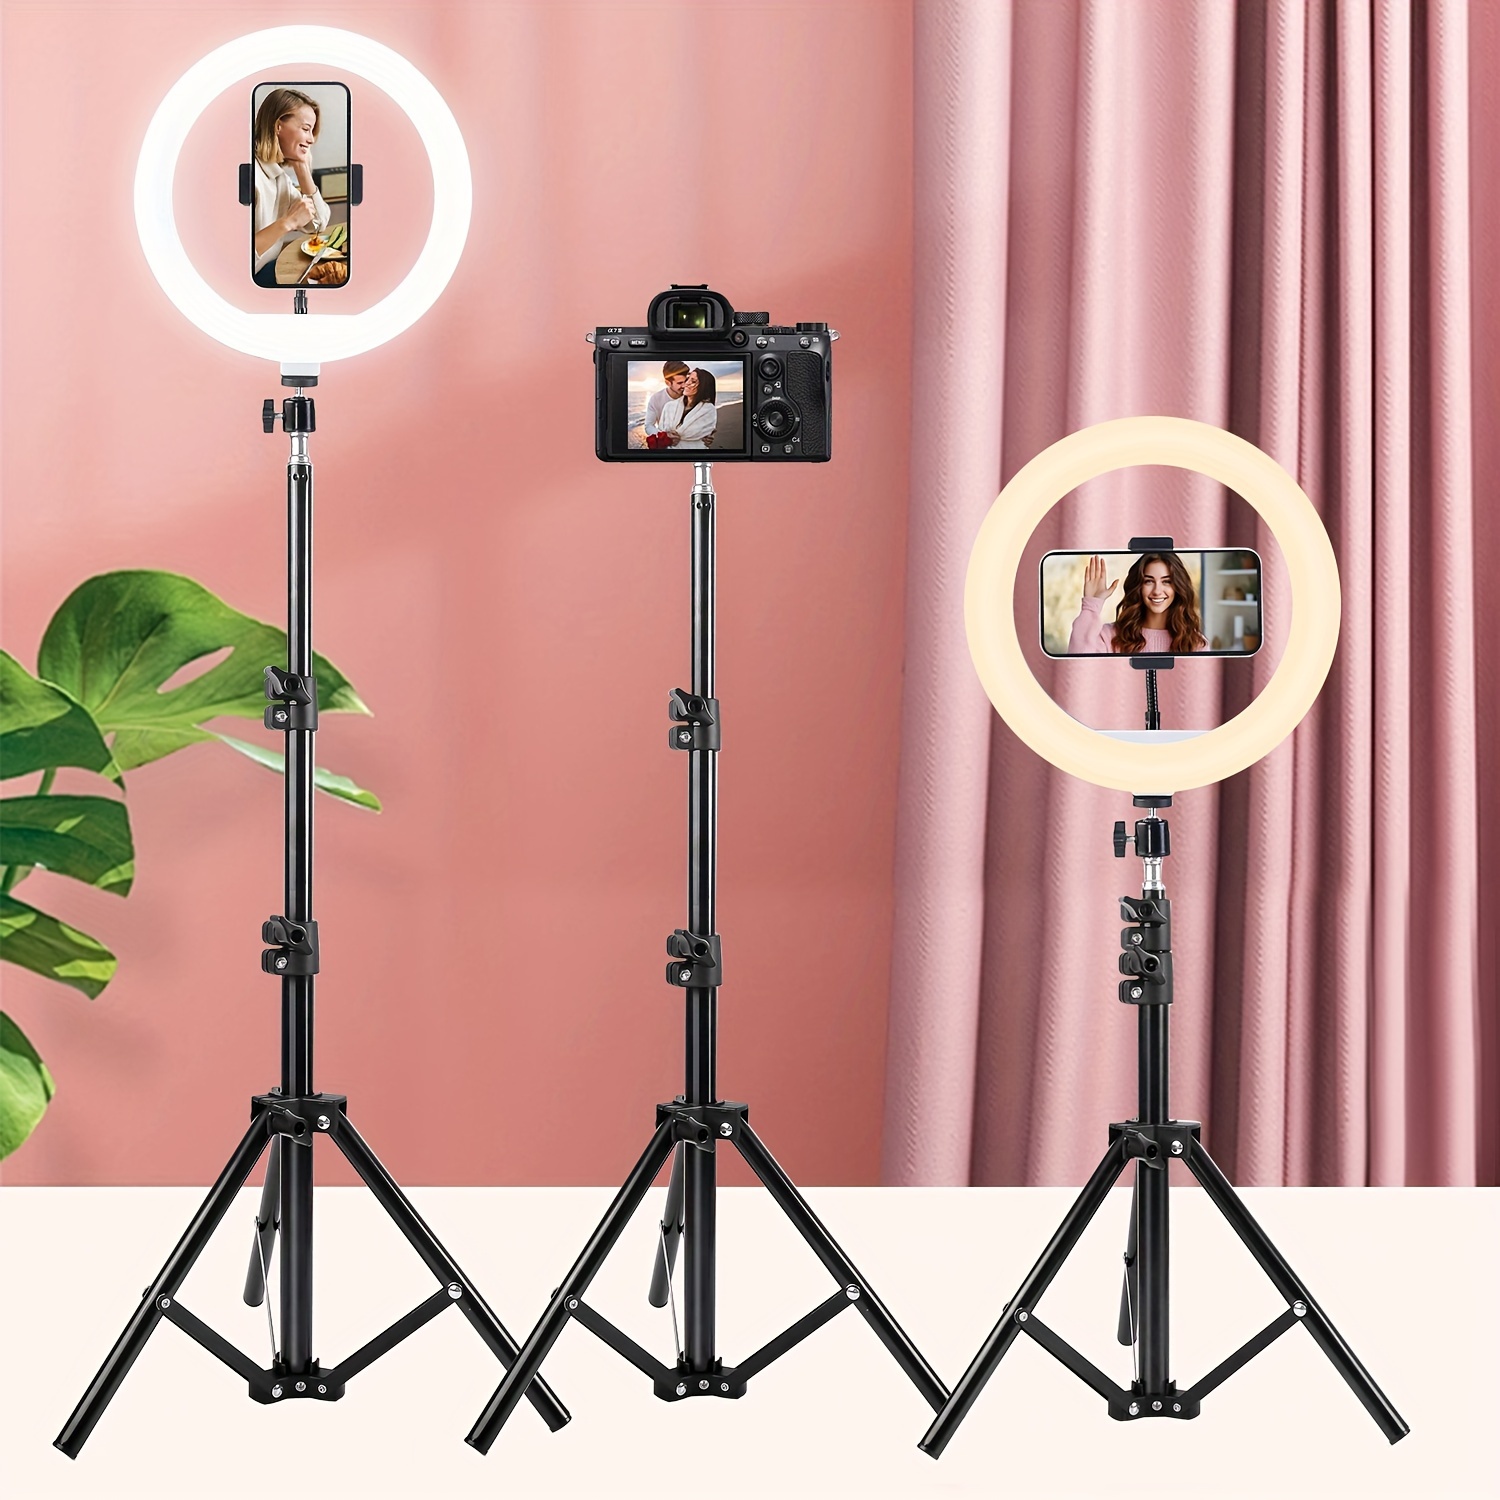 

10" Ring Light With 43" Extendable Tripod Stands And Phone Holder, Dimmable Led Circle Round Light For Selfie Camera Photography/makeup/youtube Video/vlogging/live Streaming